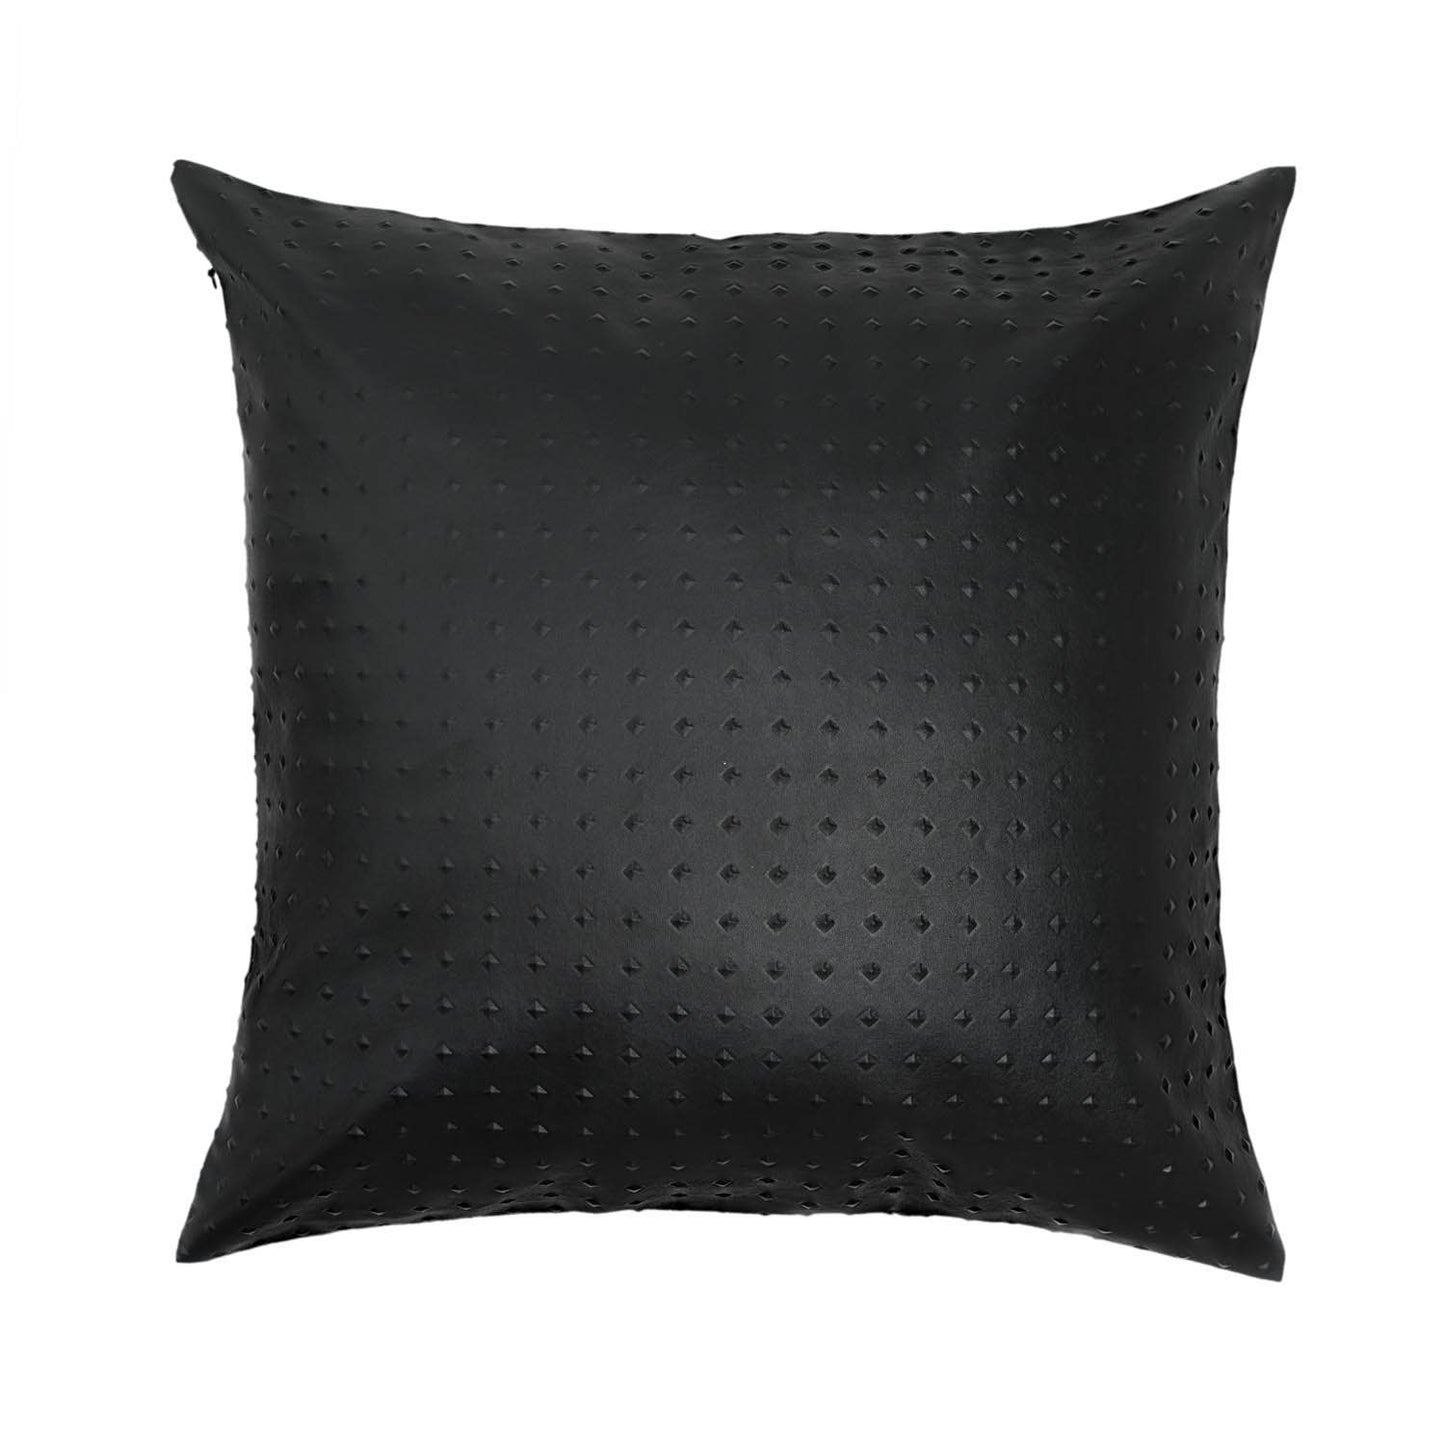 Textured Faux Leather Pillow